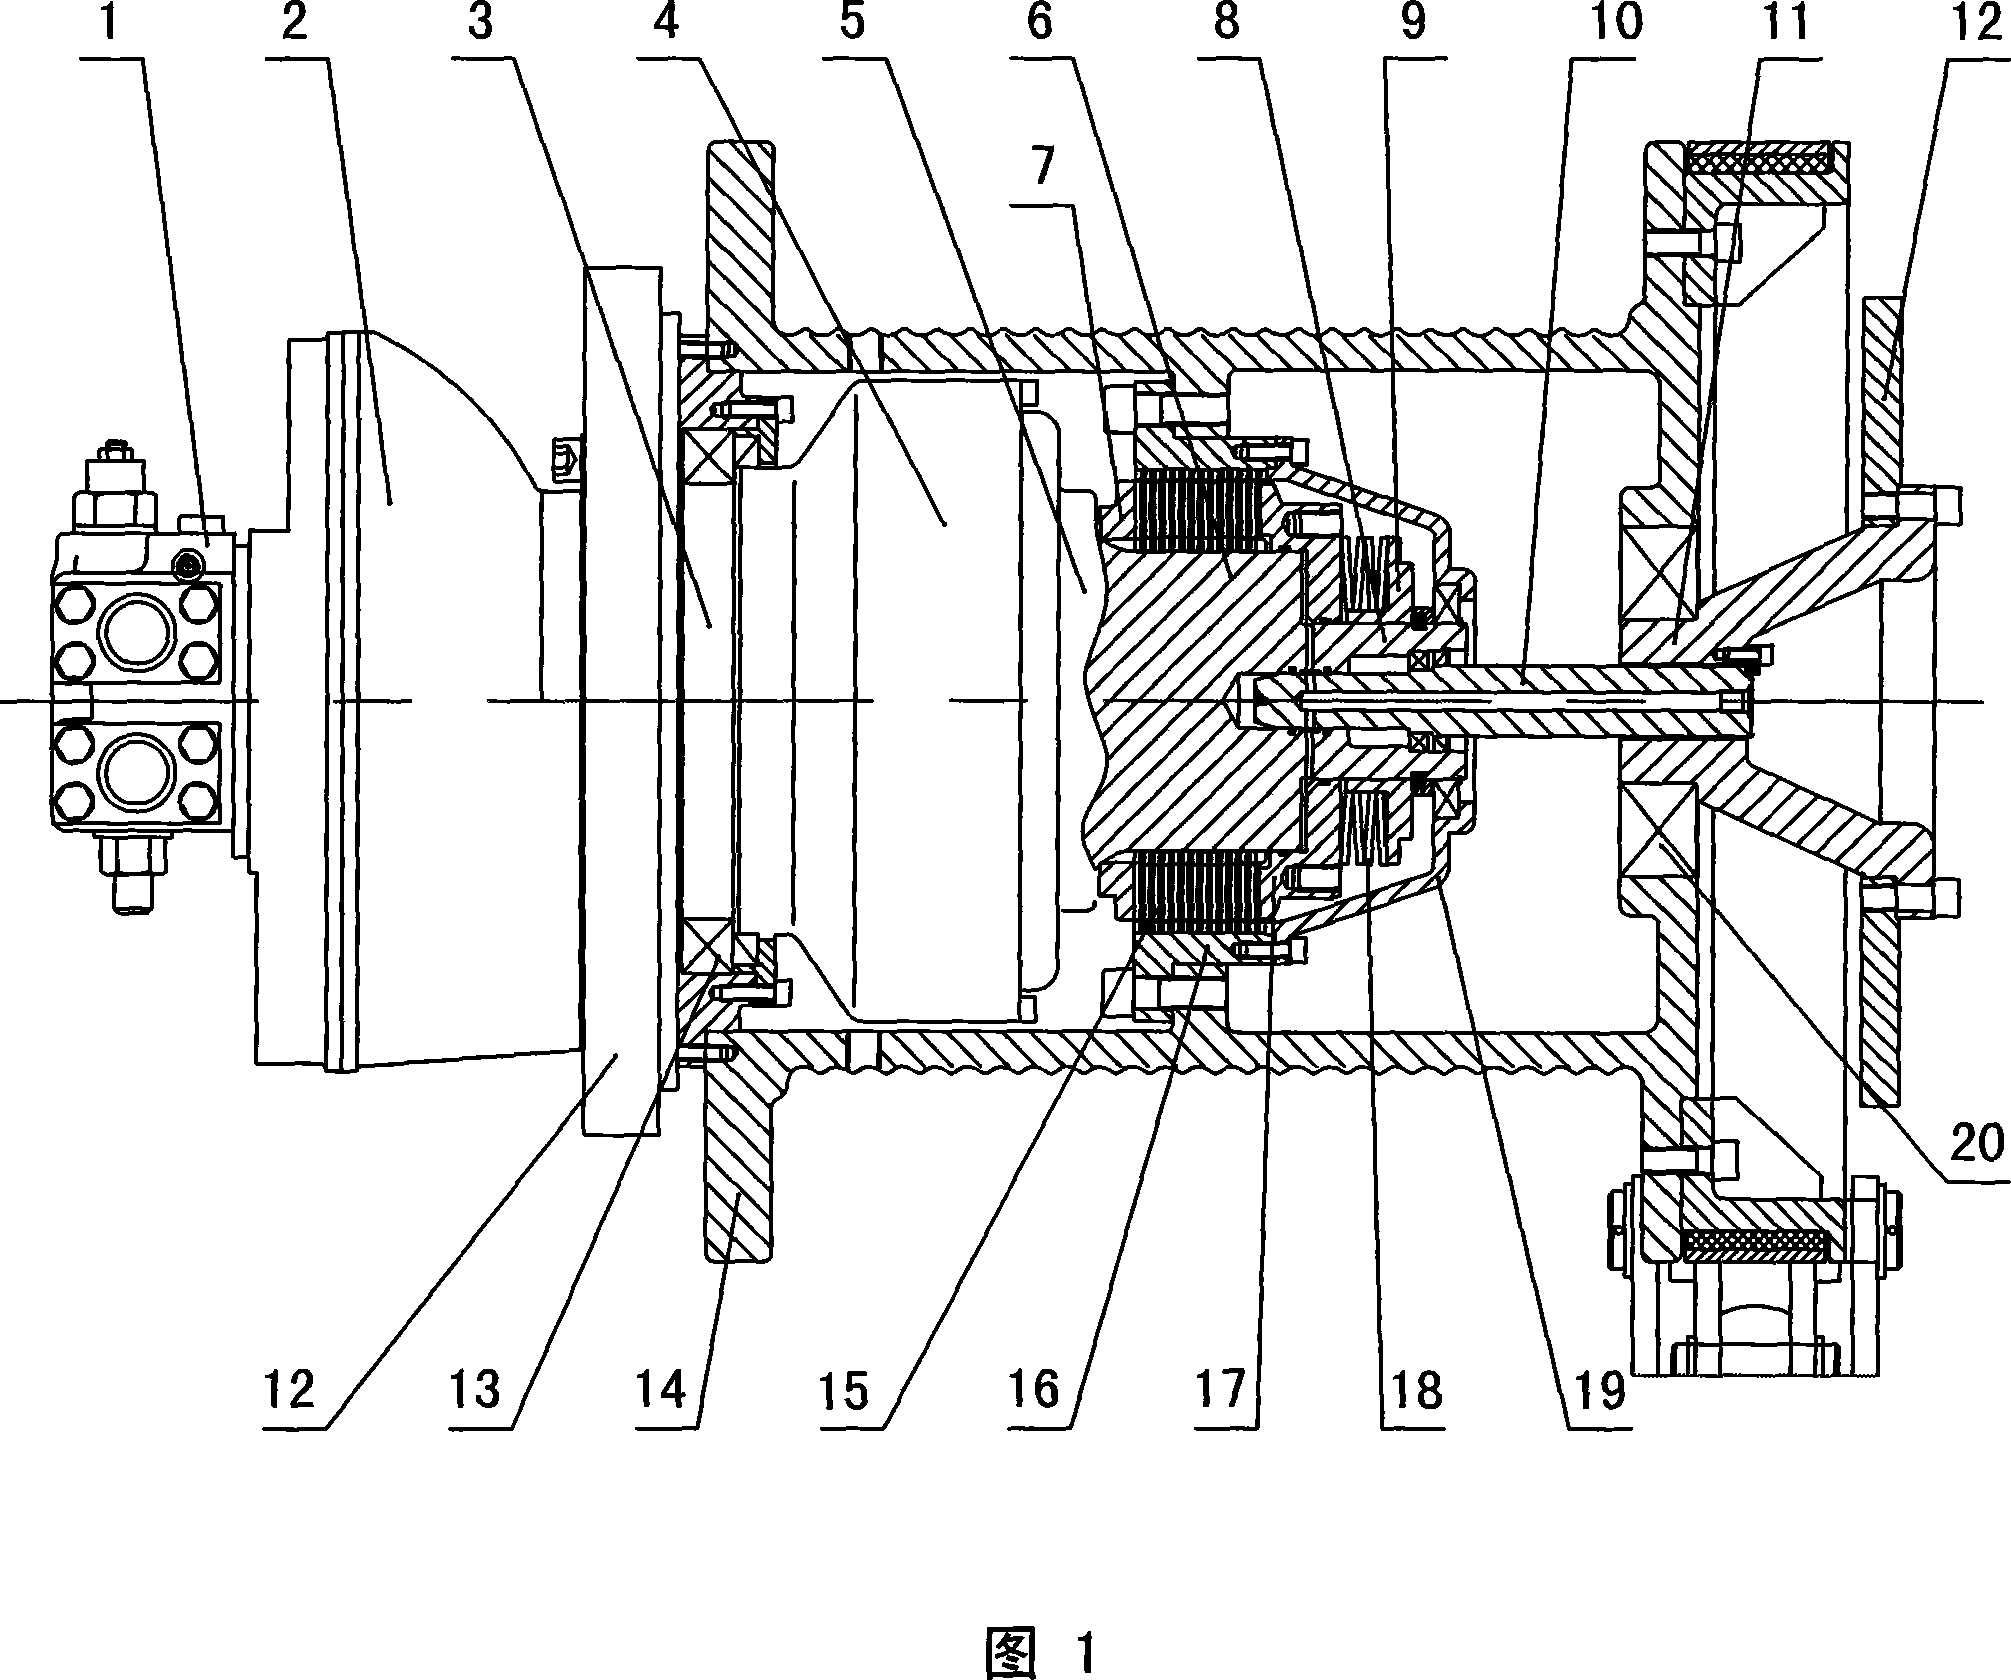 Hydraulic pressure reel cart with clutch at transmission last level